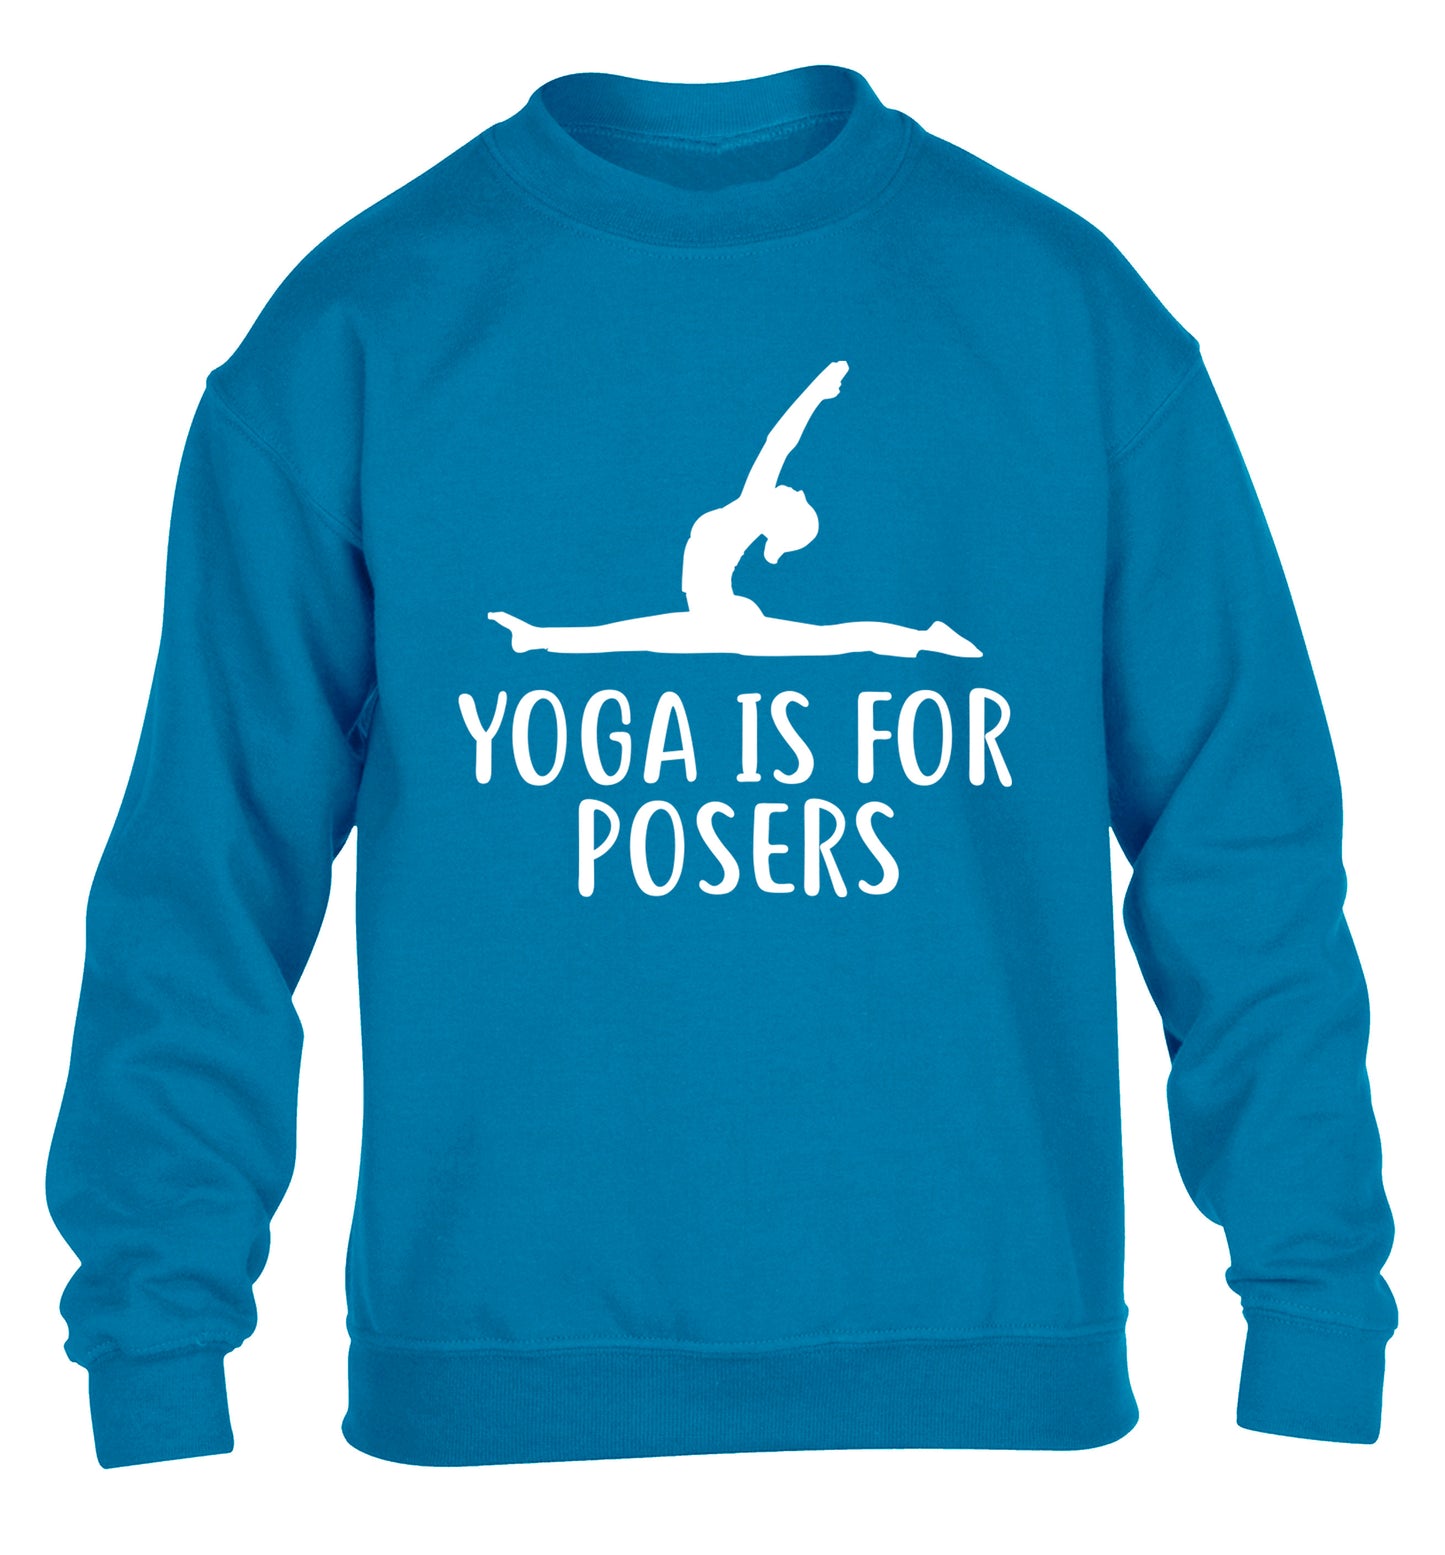 Yoga is for posers children's blue sweater 12-13 Years